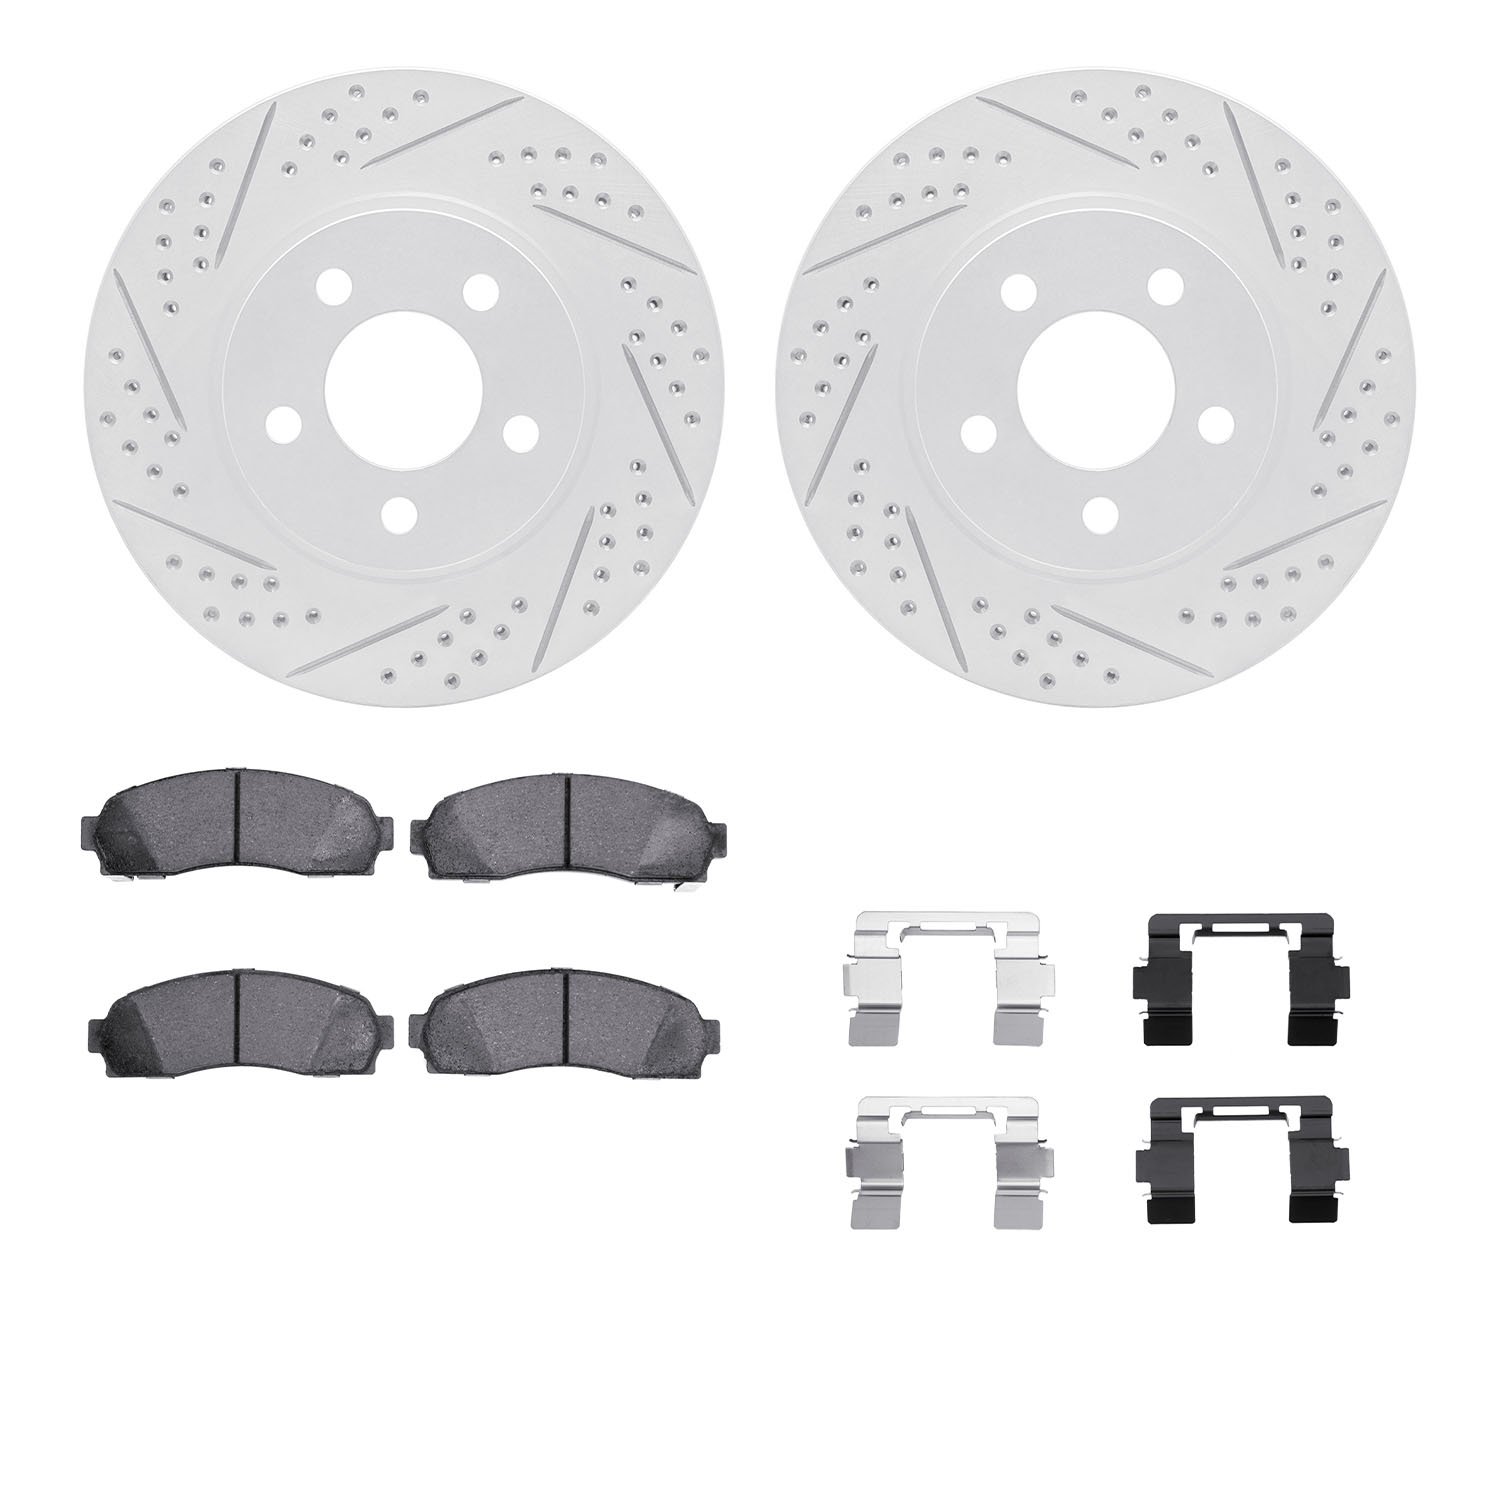 2212-99117 Geoperformance Drilled/Slotted Rotors w/Heavy-Duty Pads Kit & Hardware, 2003-2011 Ford/Lincoln/Mercury/Mazda, Positio